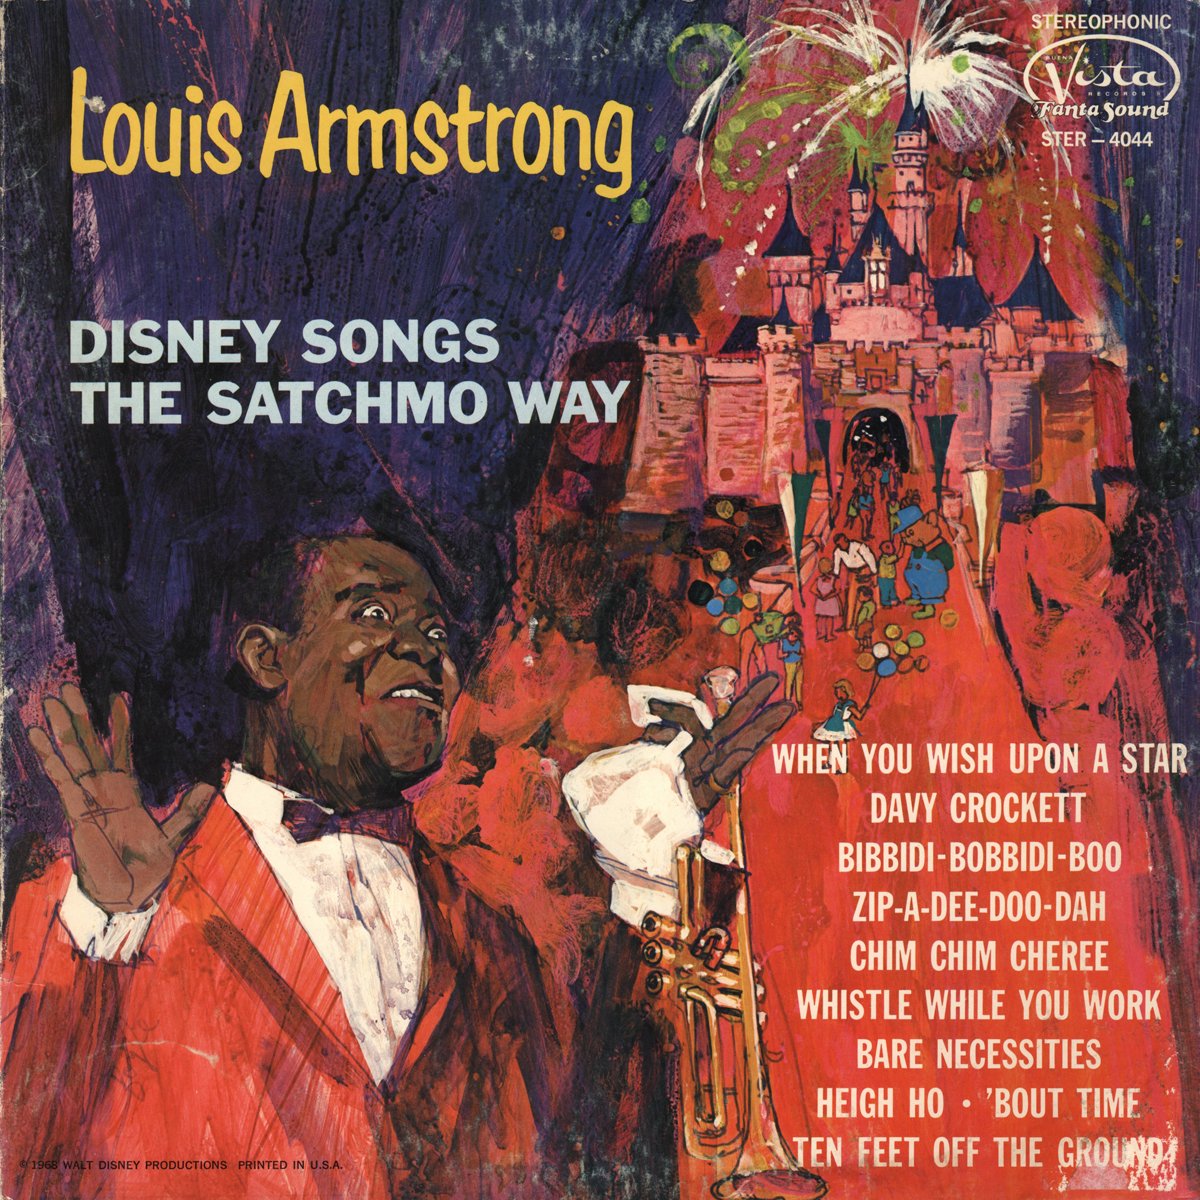 Disney Songs The Satchmo Way - Louis Armstrong — Listen and discover music at www.bagssaleusa.com